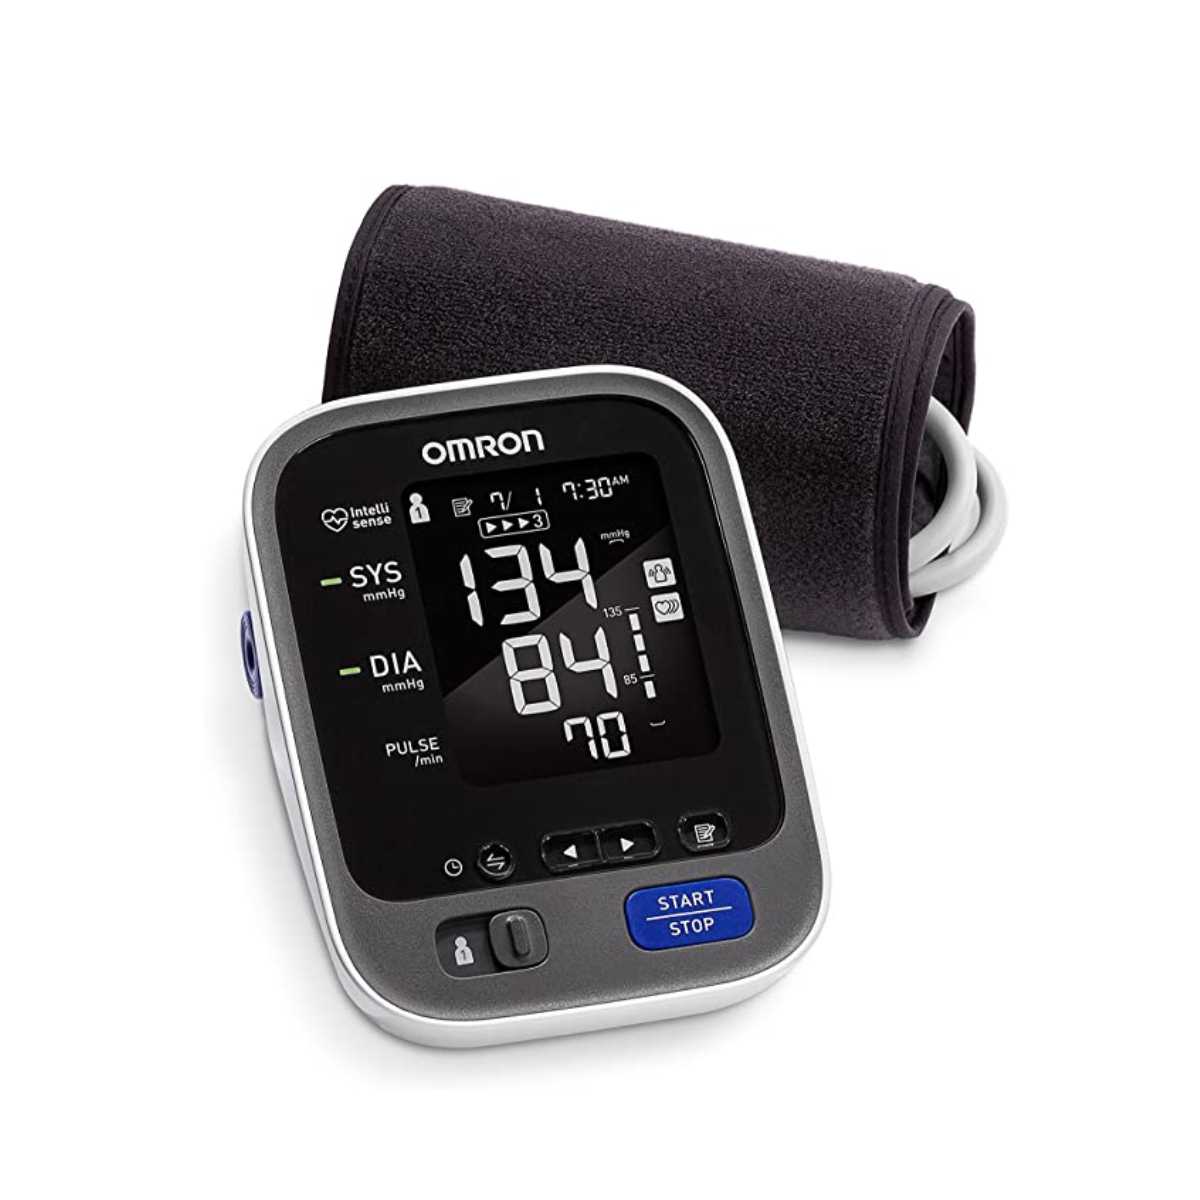 Brand New Omron 10 Series Blood Pressure Monitor for Sale in